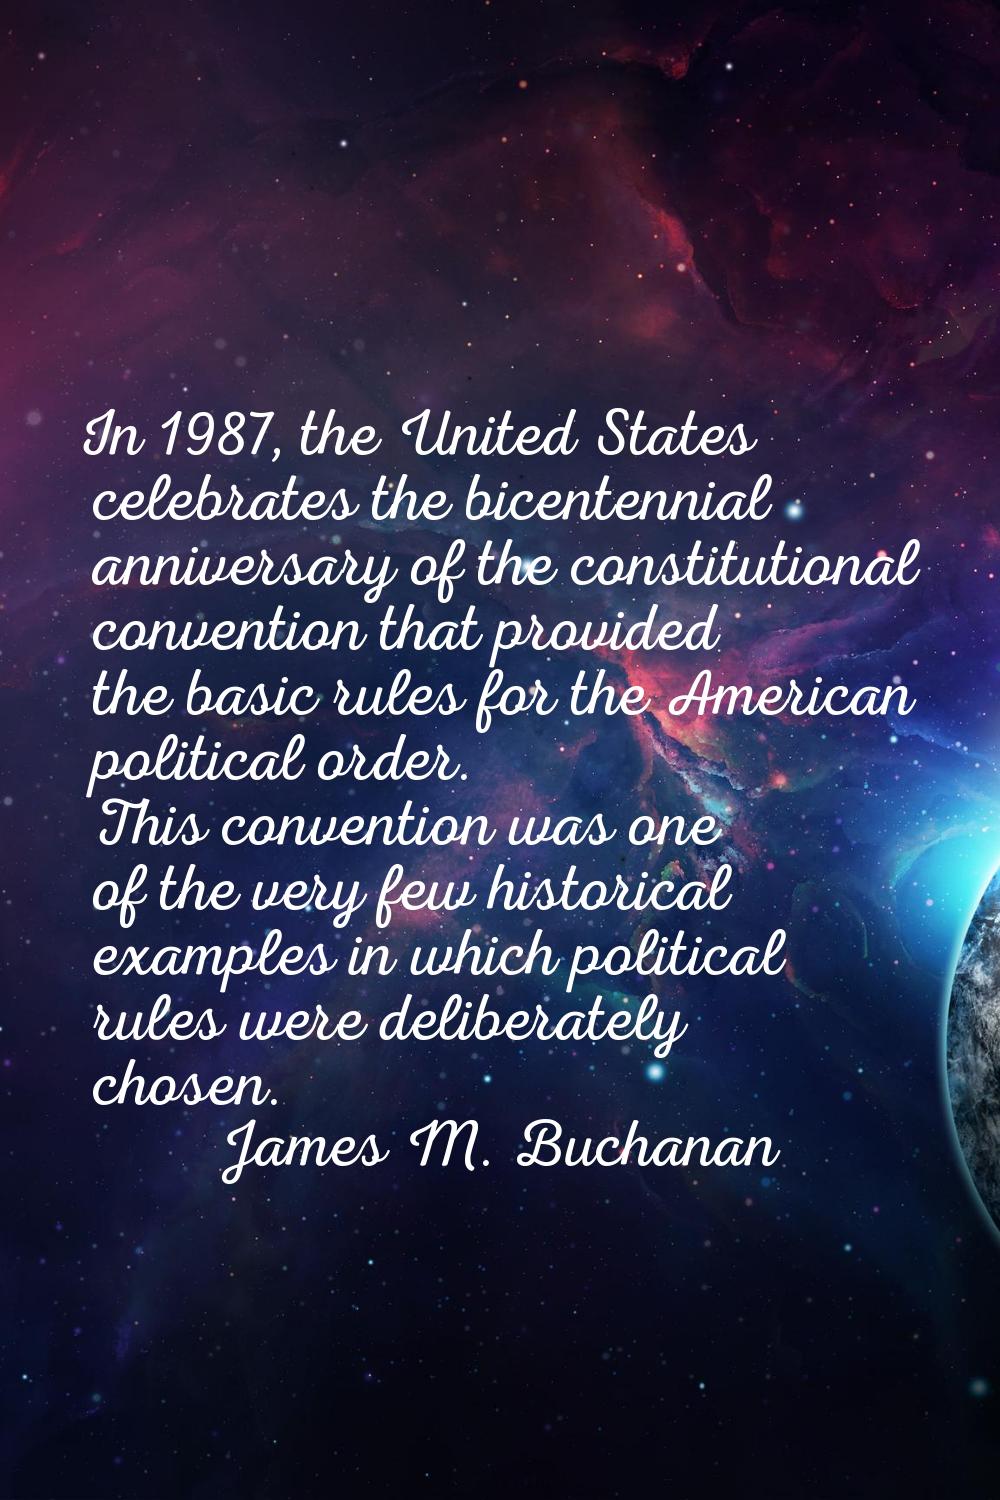 In 1987, the United States celebrates the bicentennial anniversary of the constitutional convention